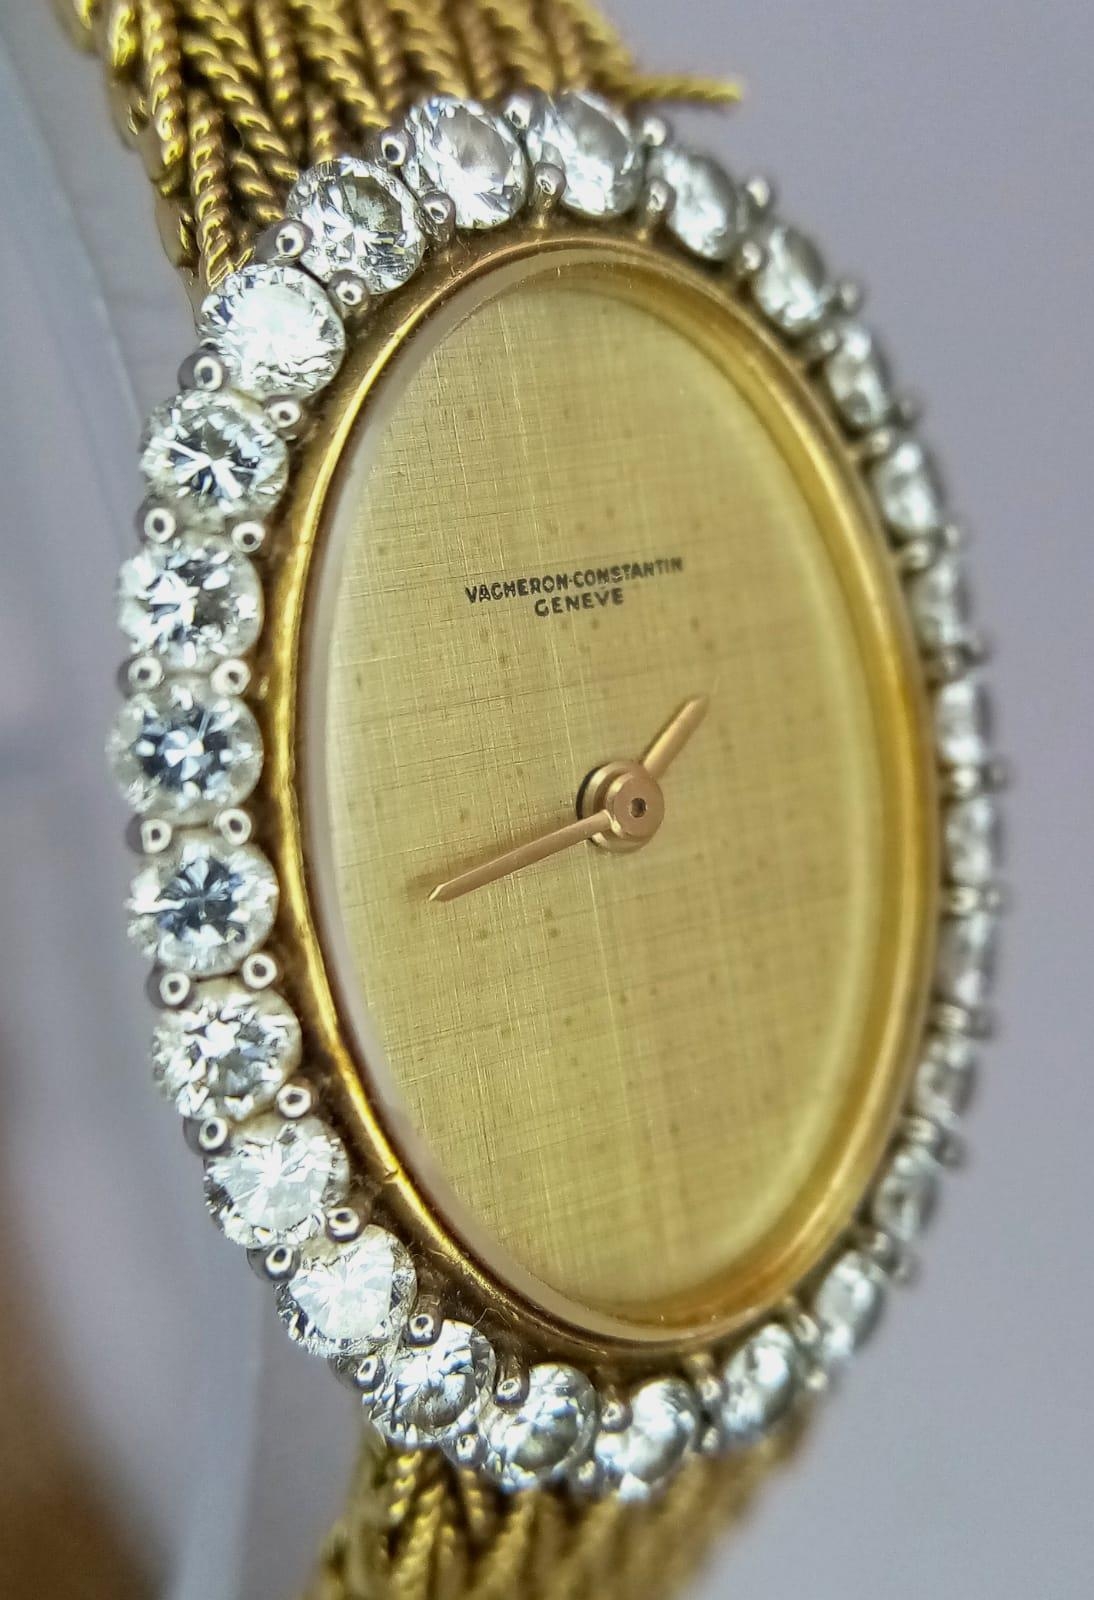 A Vacheron-Constantin 18K Yellow Gold and Diamond Ladies Watch. Gold bracelet and oval case - - Image 3 of 9